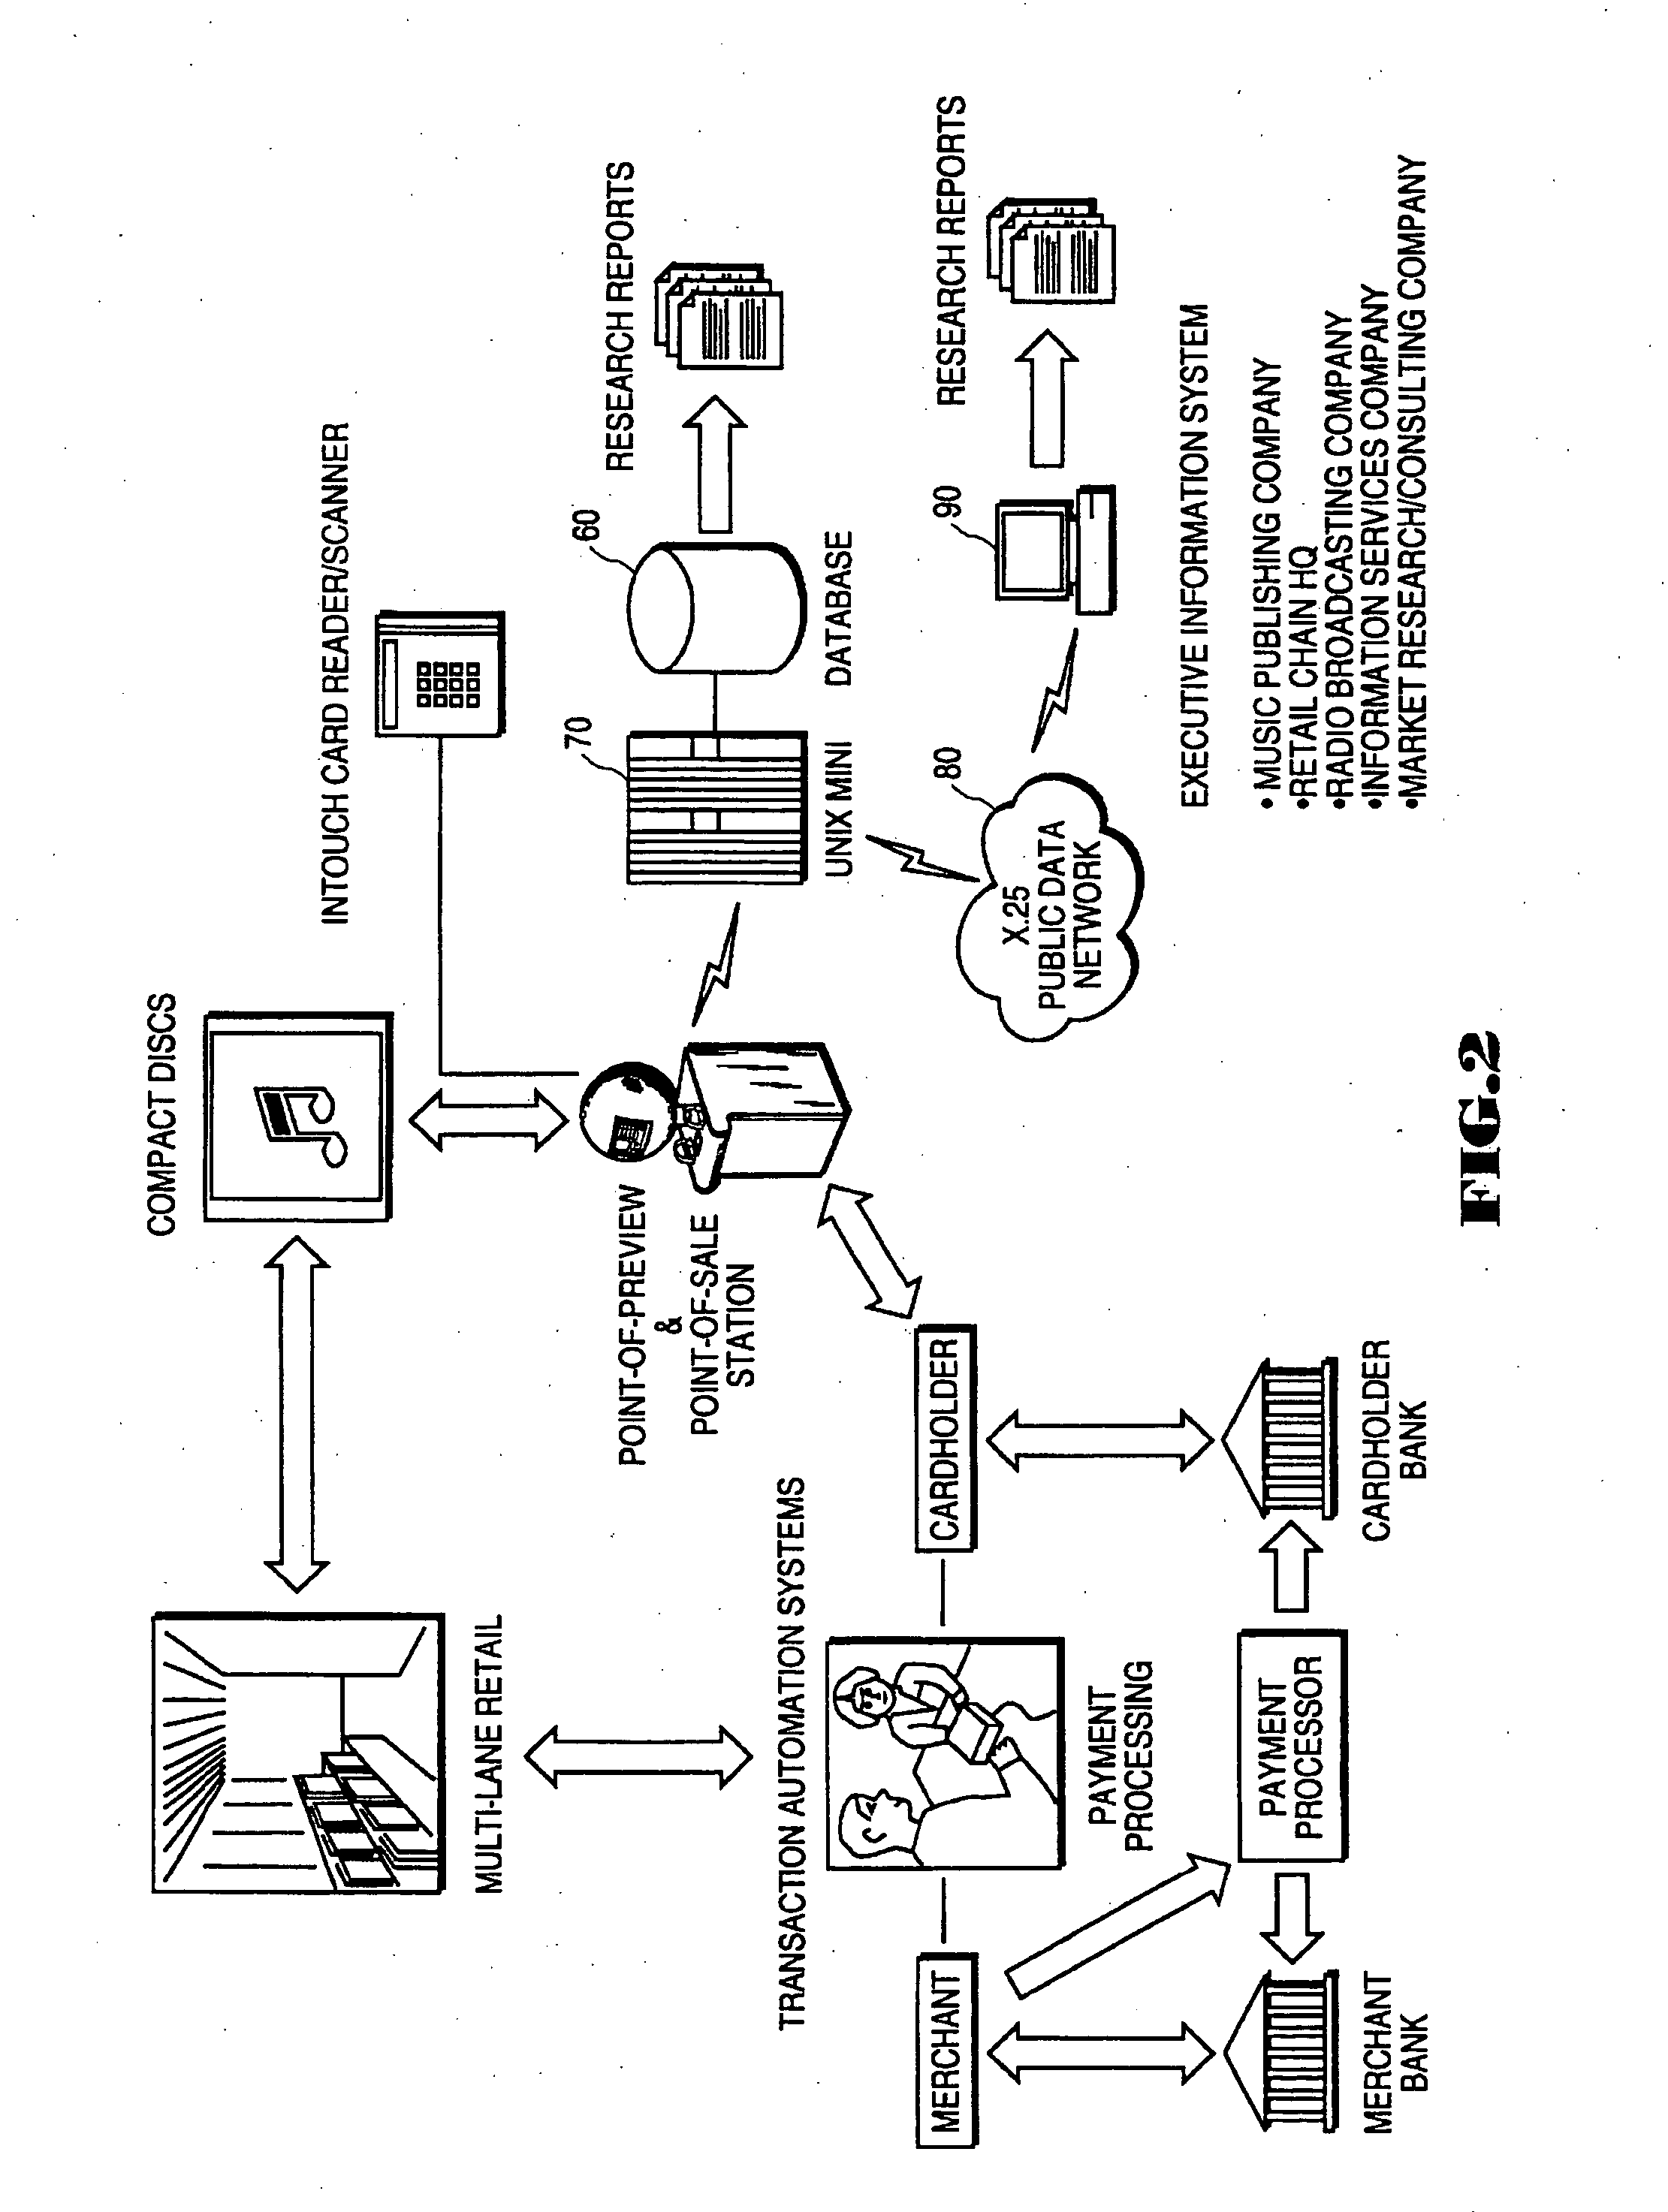 Network apparatus and method for preview of music products and compilation of market data